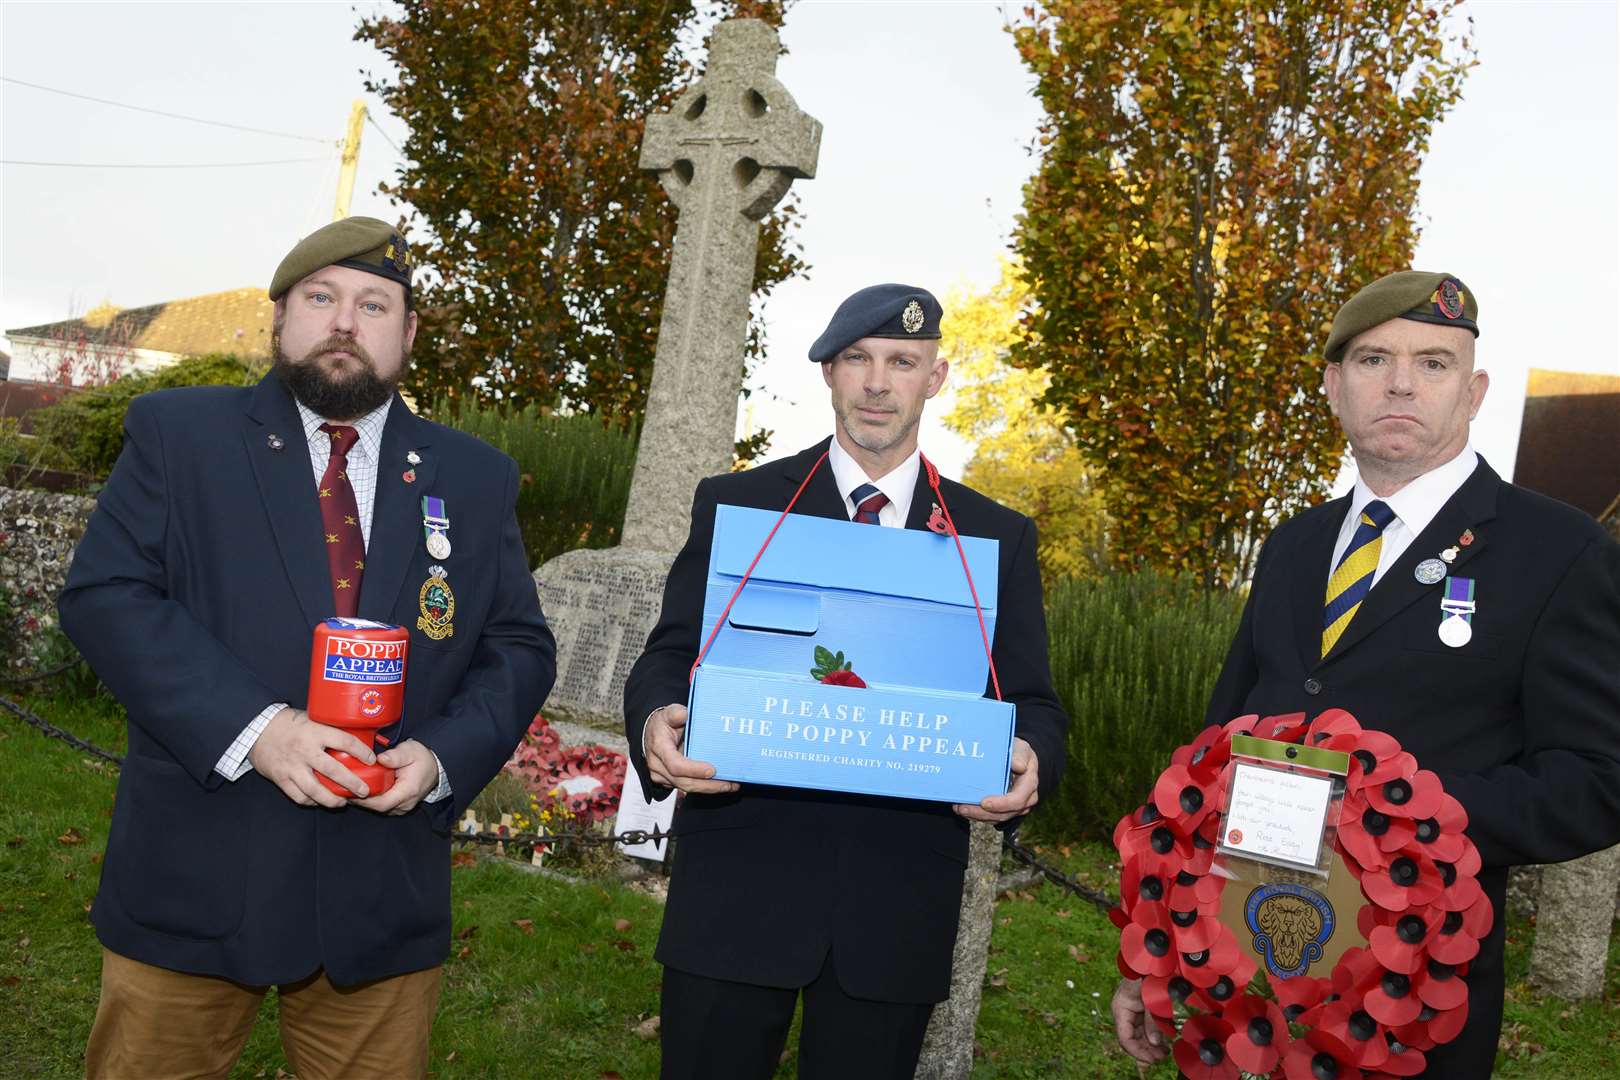 Chartham poppy sellers, from left, Steve Pryce, Charlie Thomson and Stuart Mears have had doors closed on them while collecting. Picture: Paul Amos